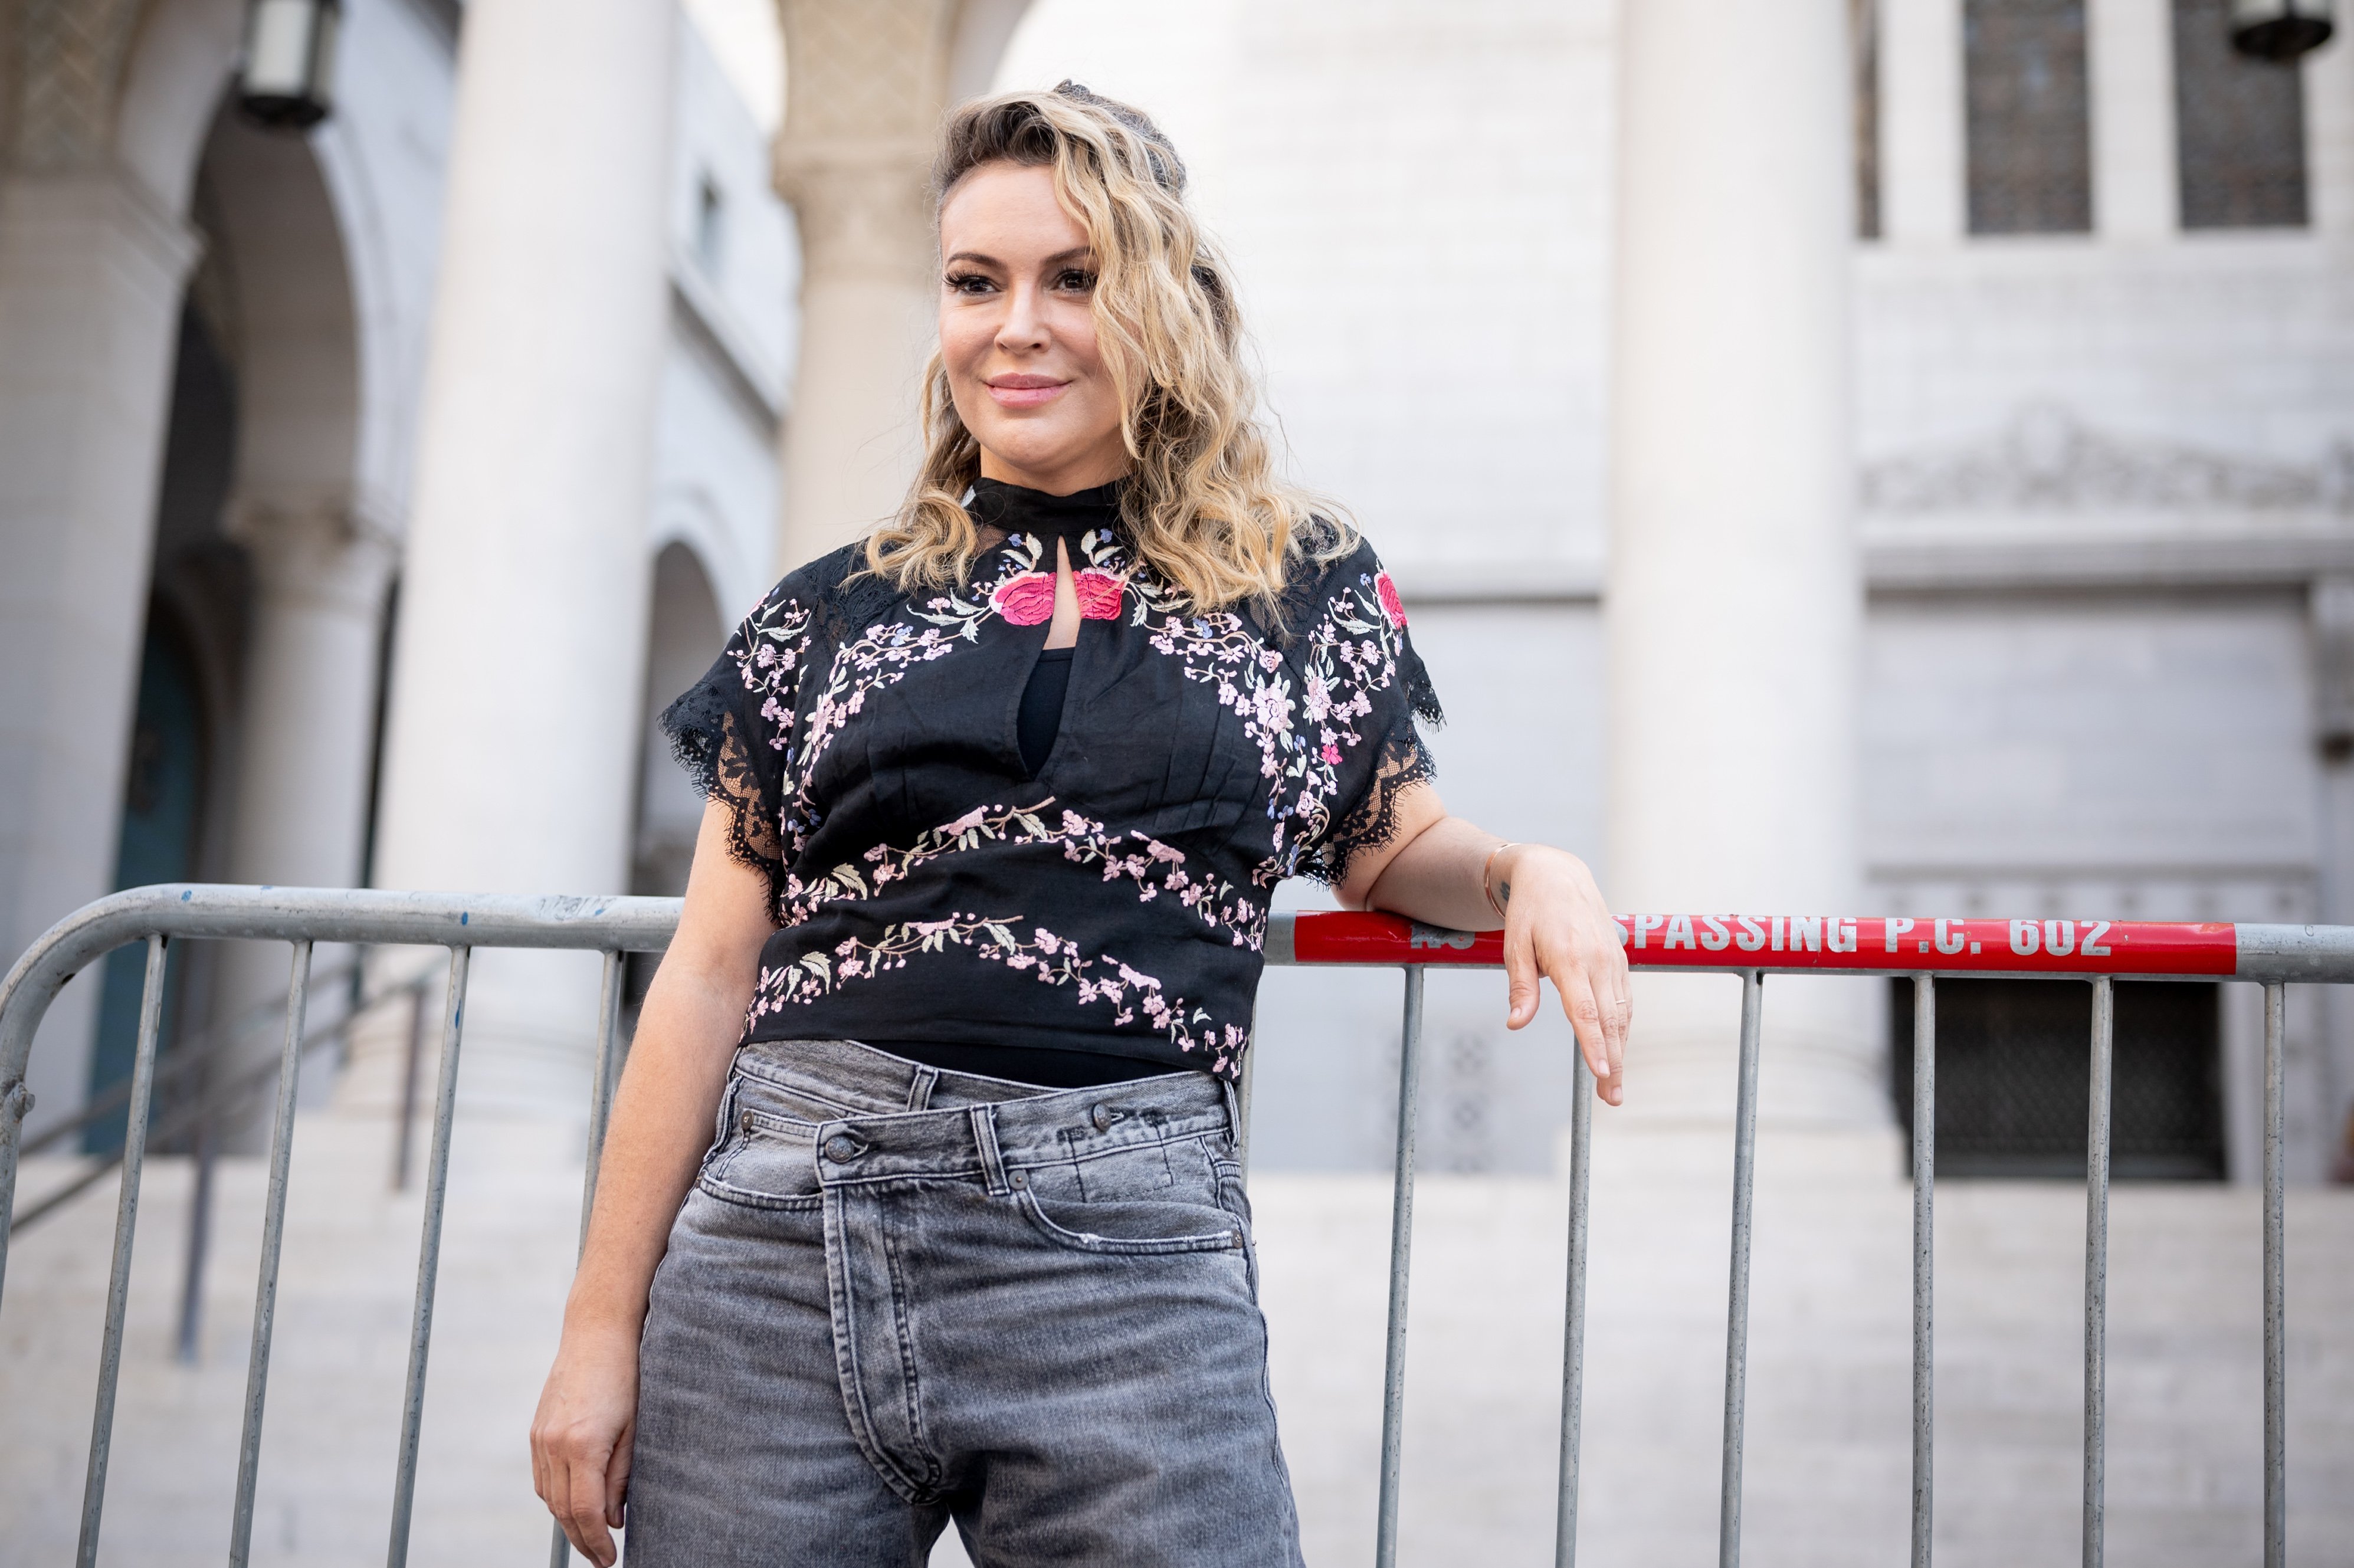 Alyssa Milano at the Women's March 4 Reproductive Rights in LA, 2021 | Photo: Getty Images 